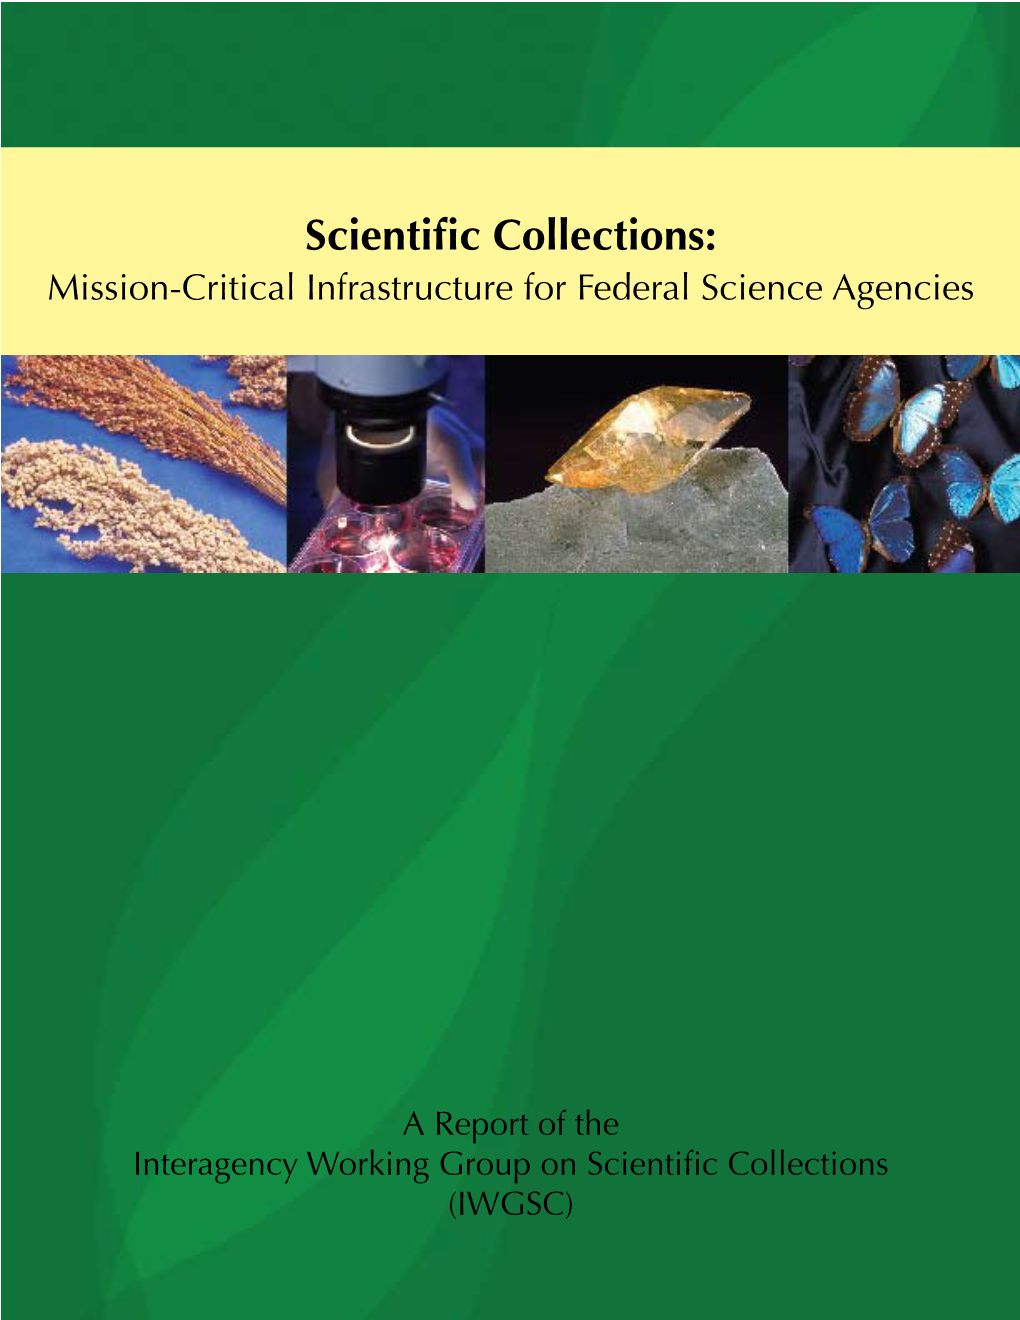 Scientific Collections: Mission-Critical Infrastructure for Federal Science Agencies